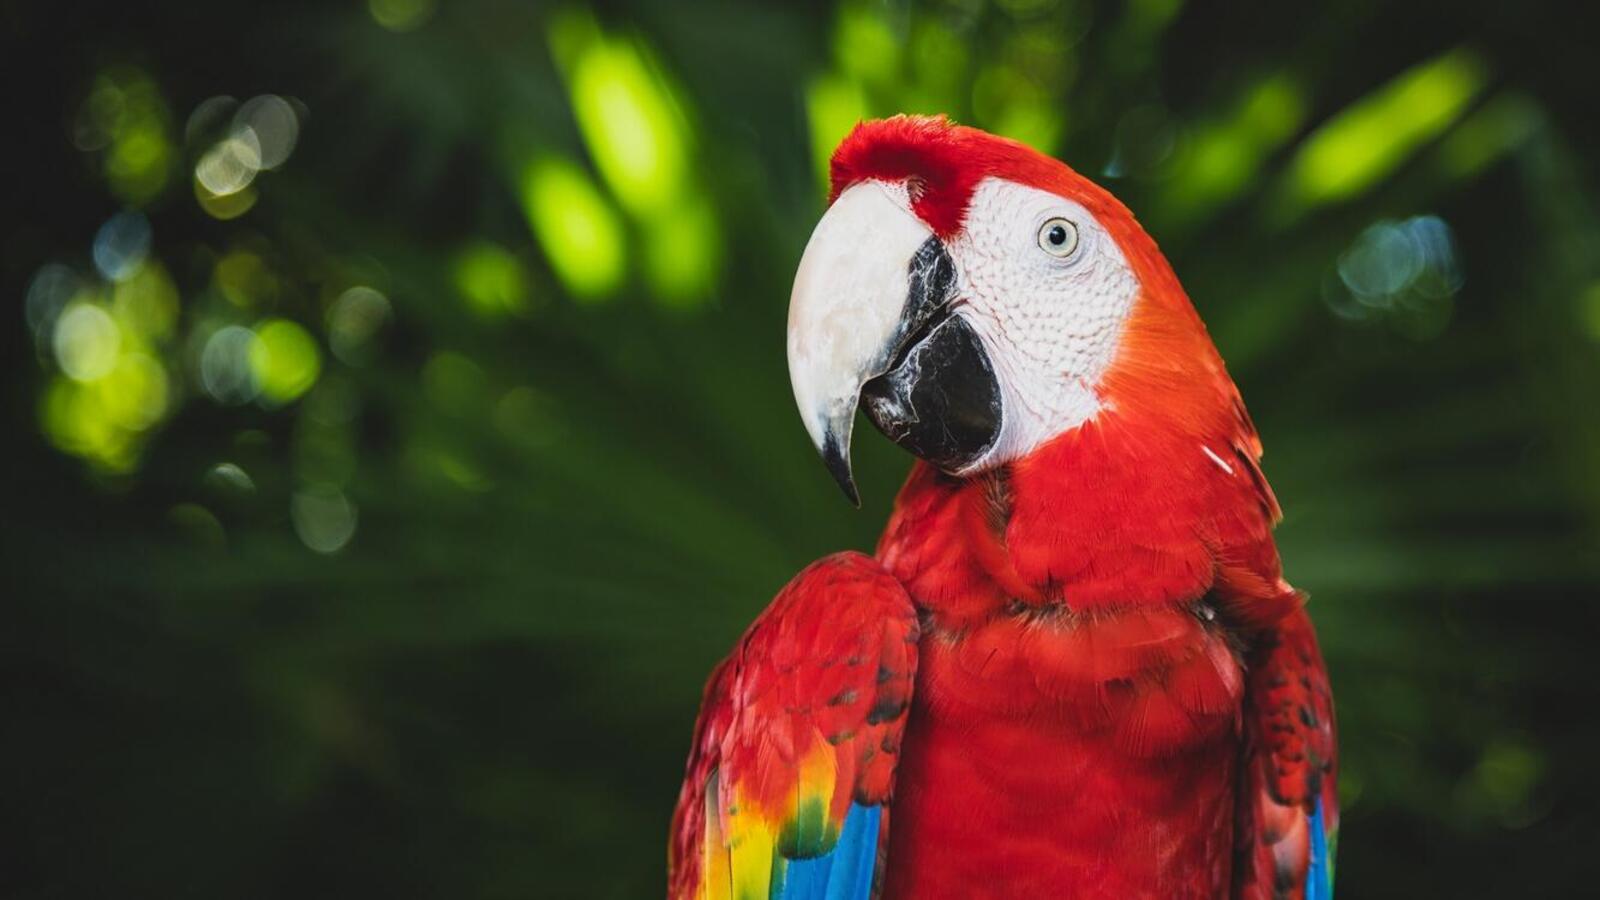 Wallpapers wallpaper macaw parrot sight close on the desktop